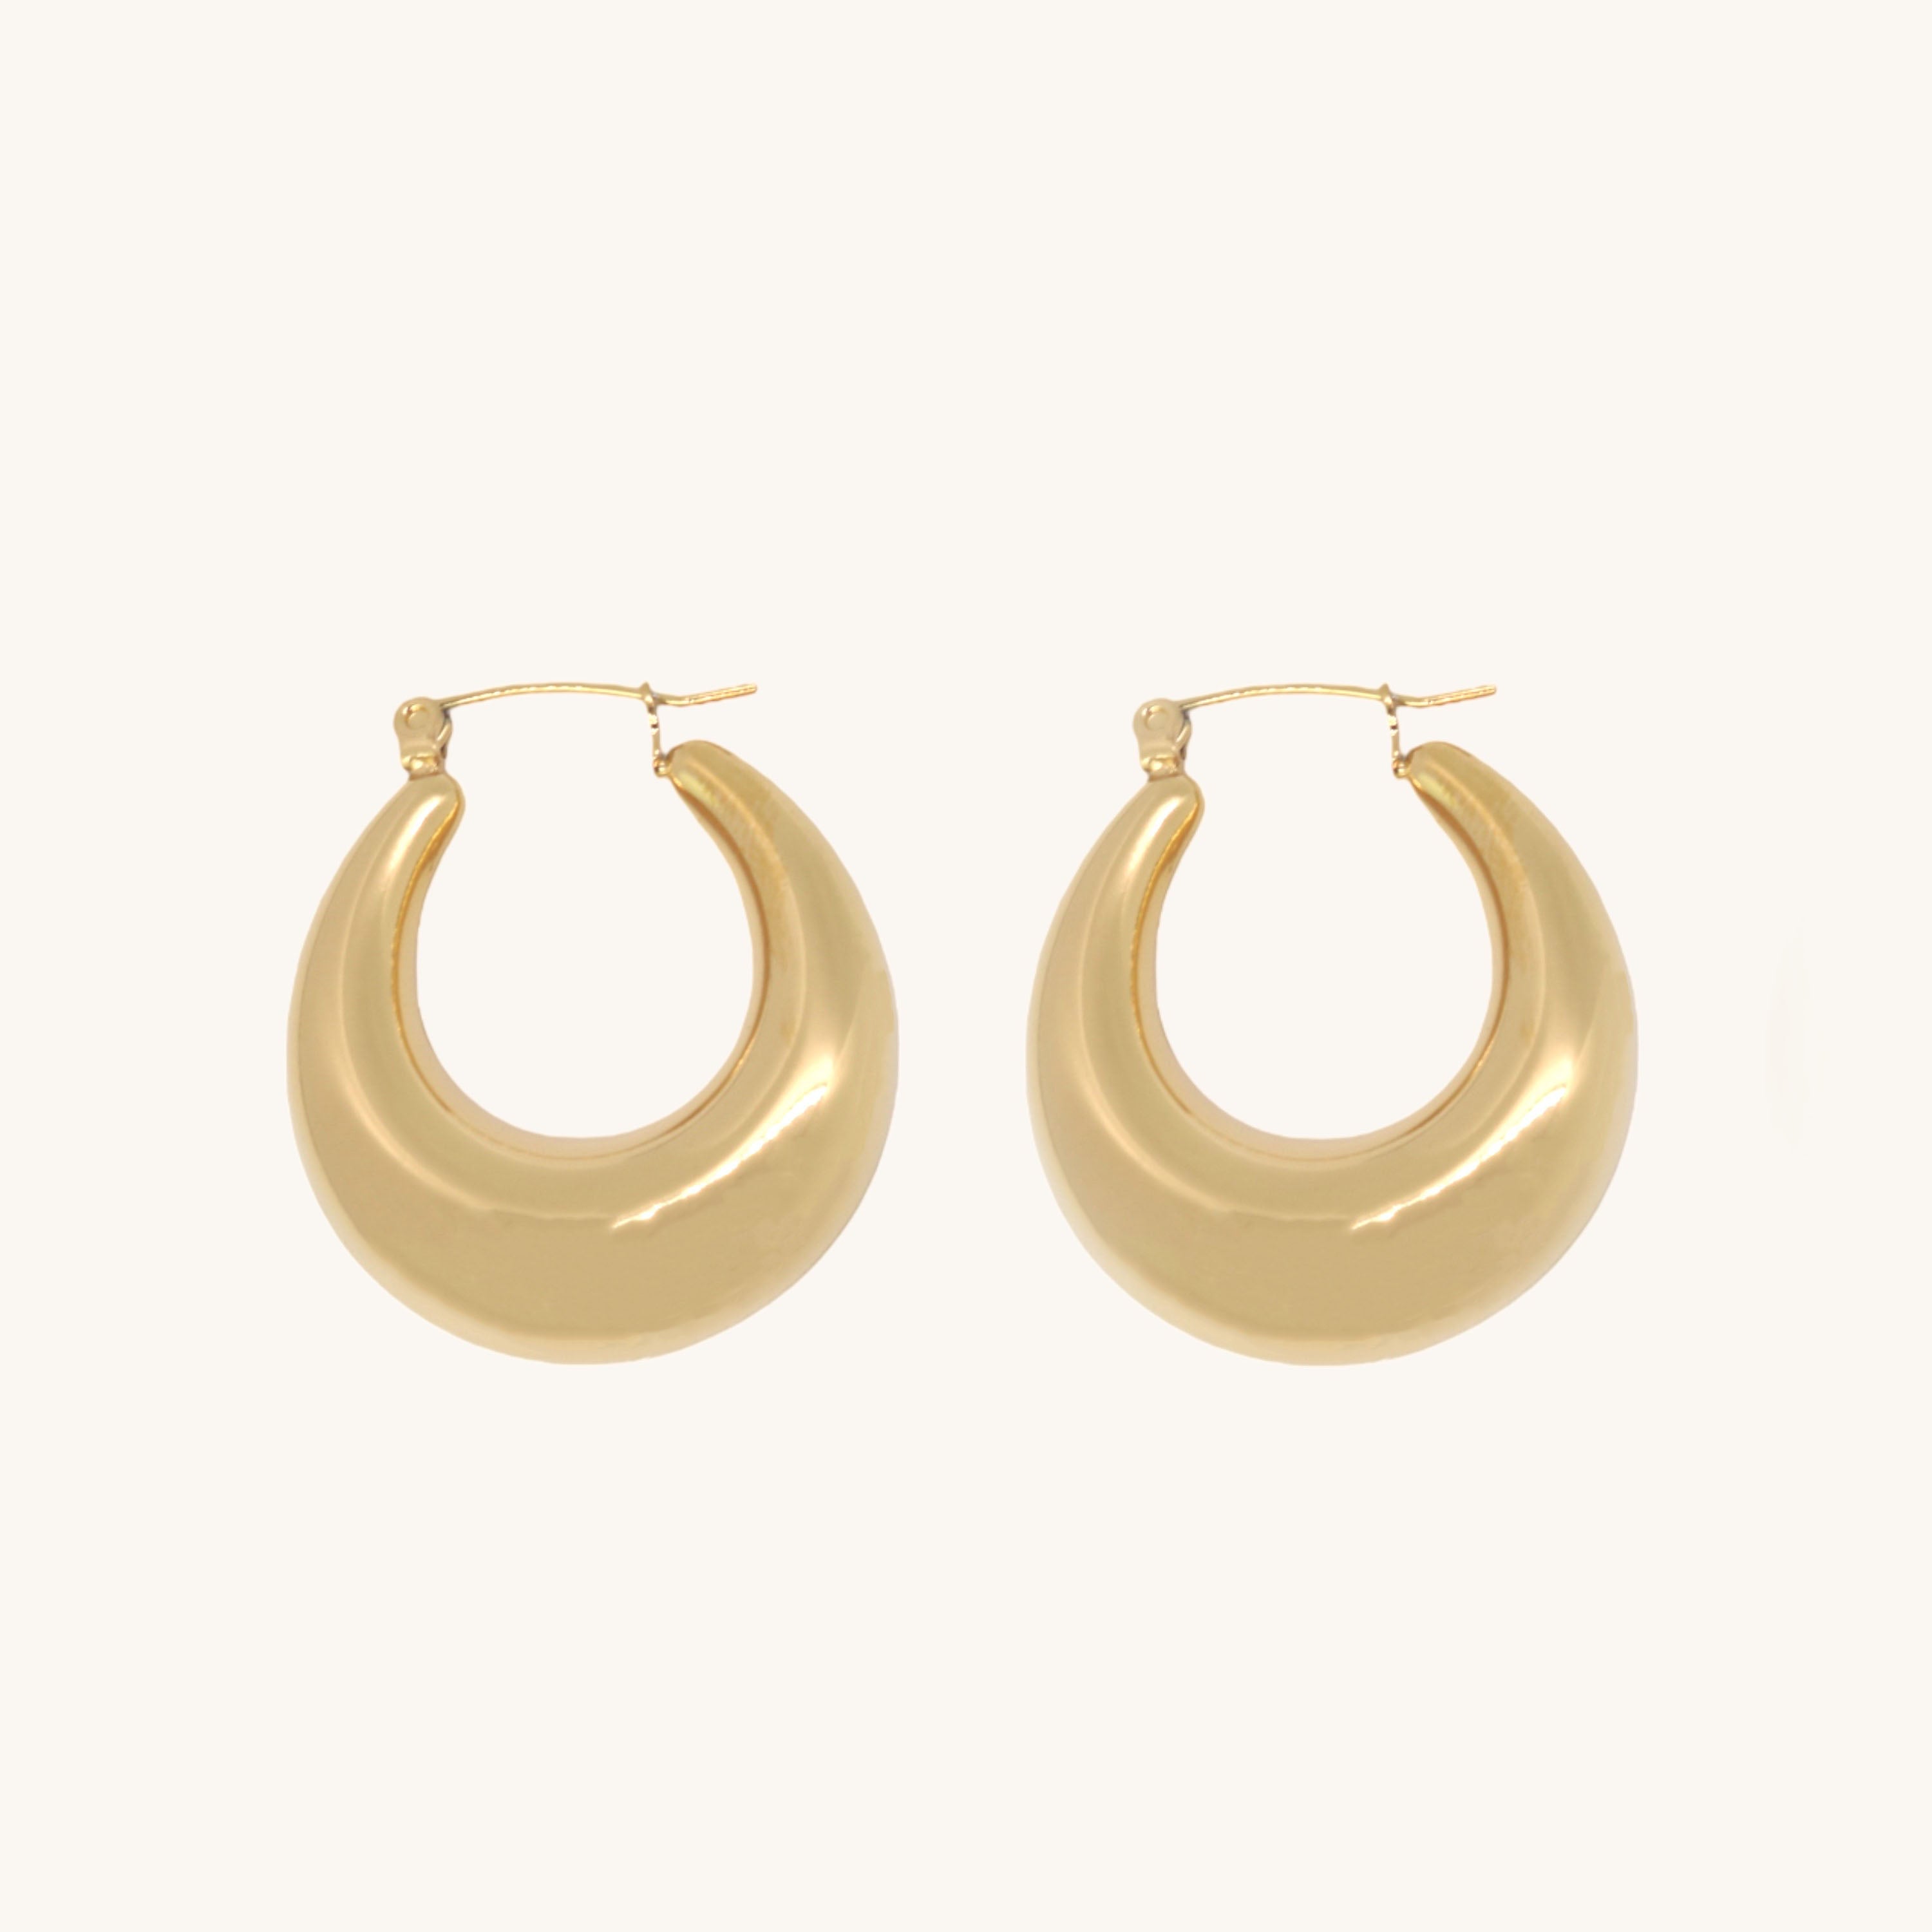 Update more than 137 big thick gold hoop earrings super hot